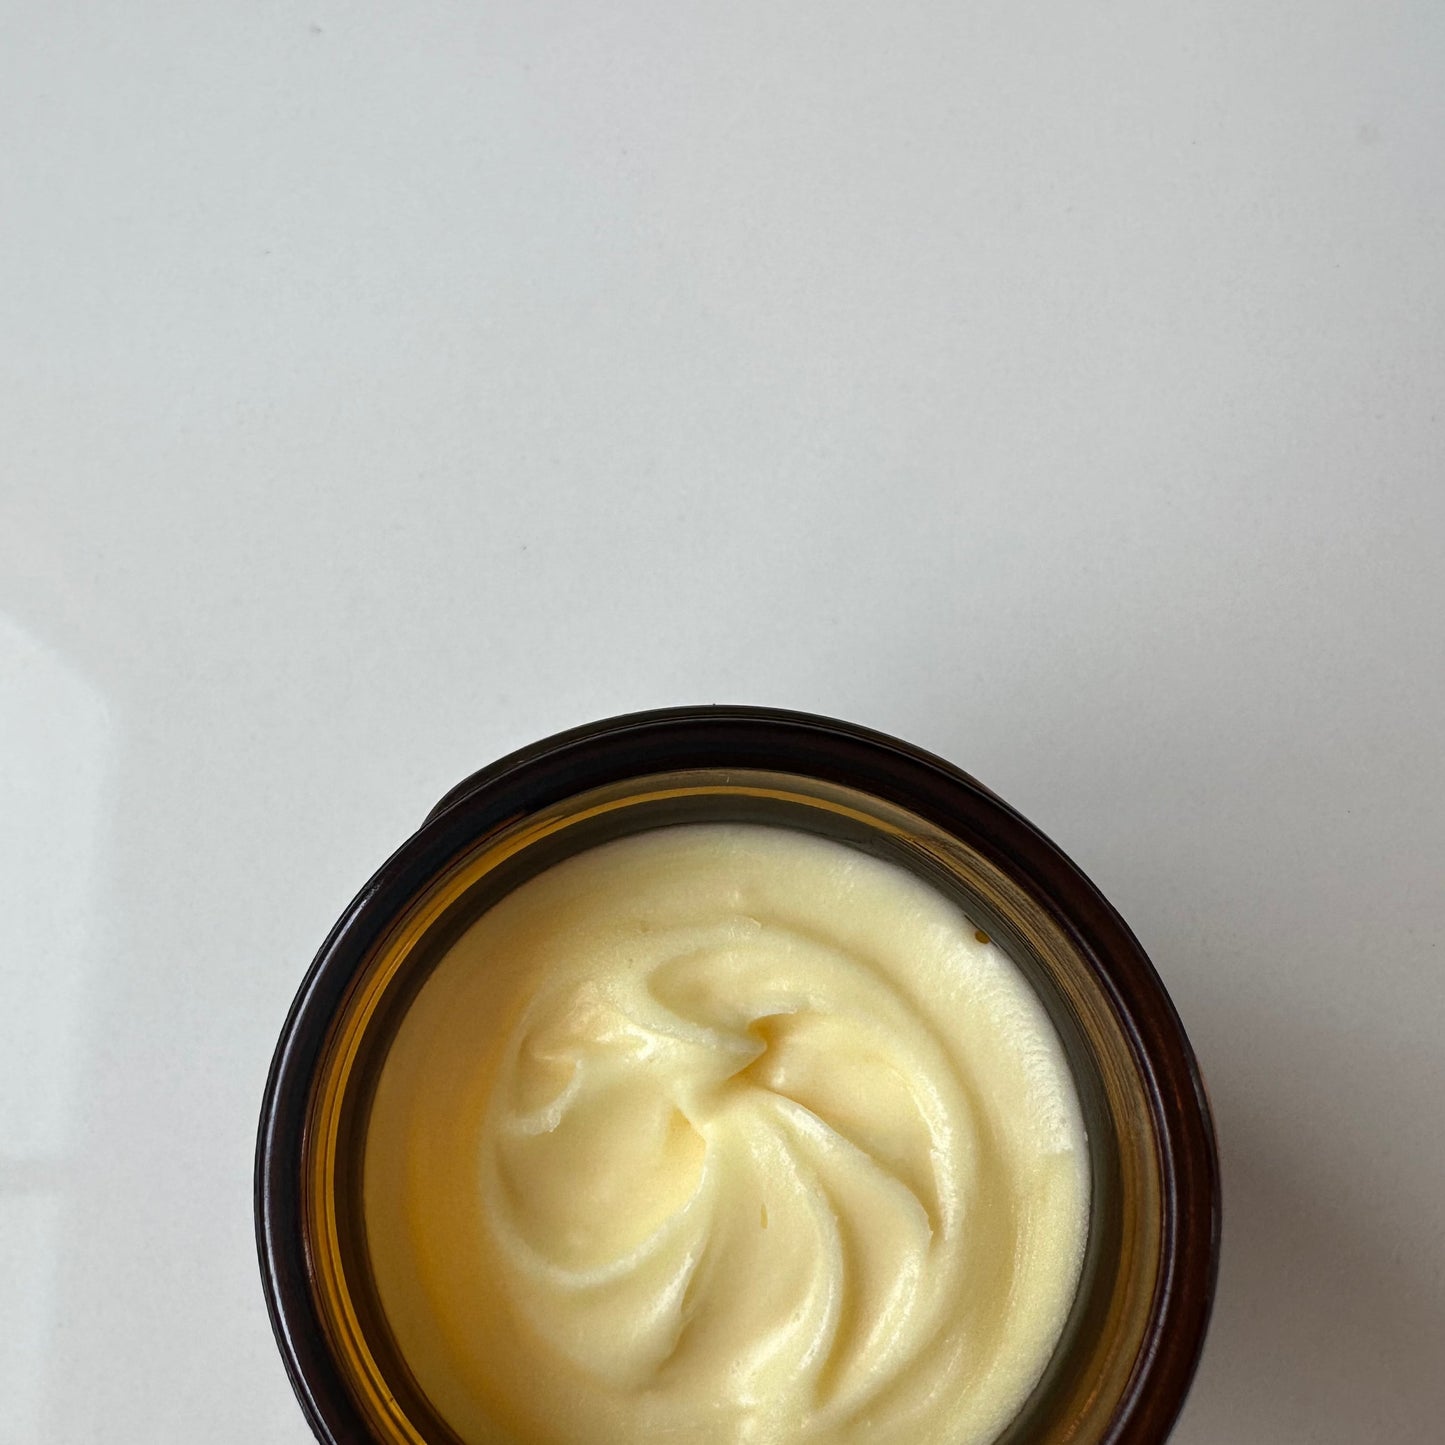 Ethereal Tallow Balm Is a tallow-based cream for face and body.